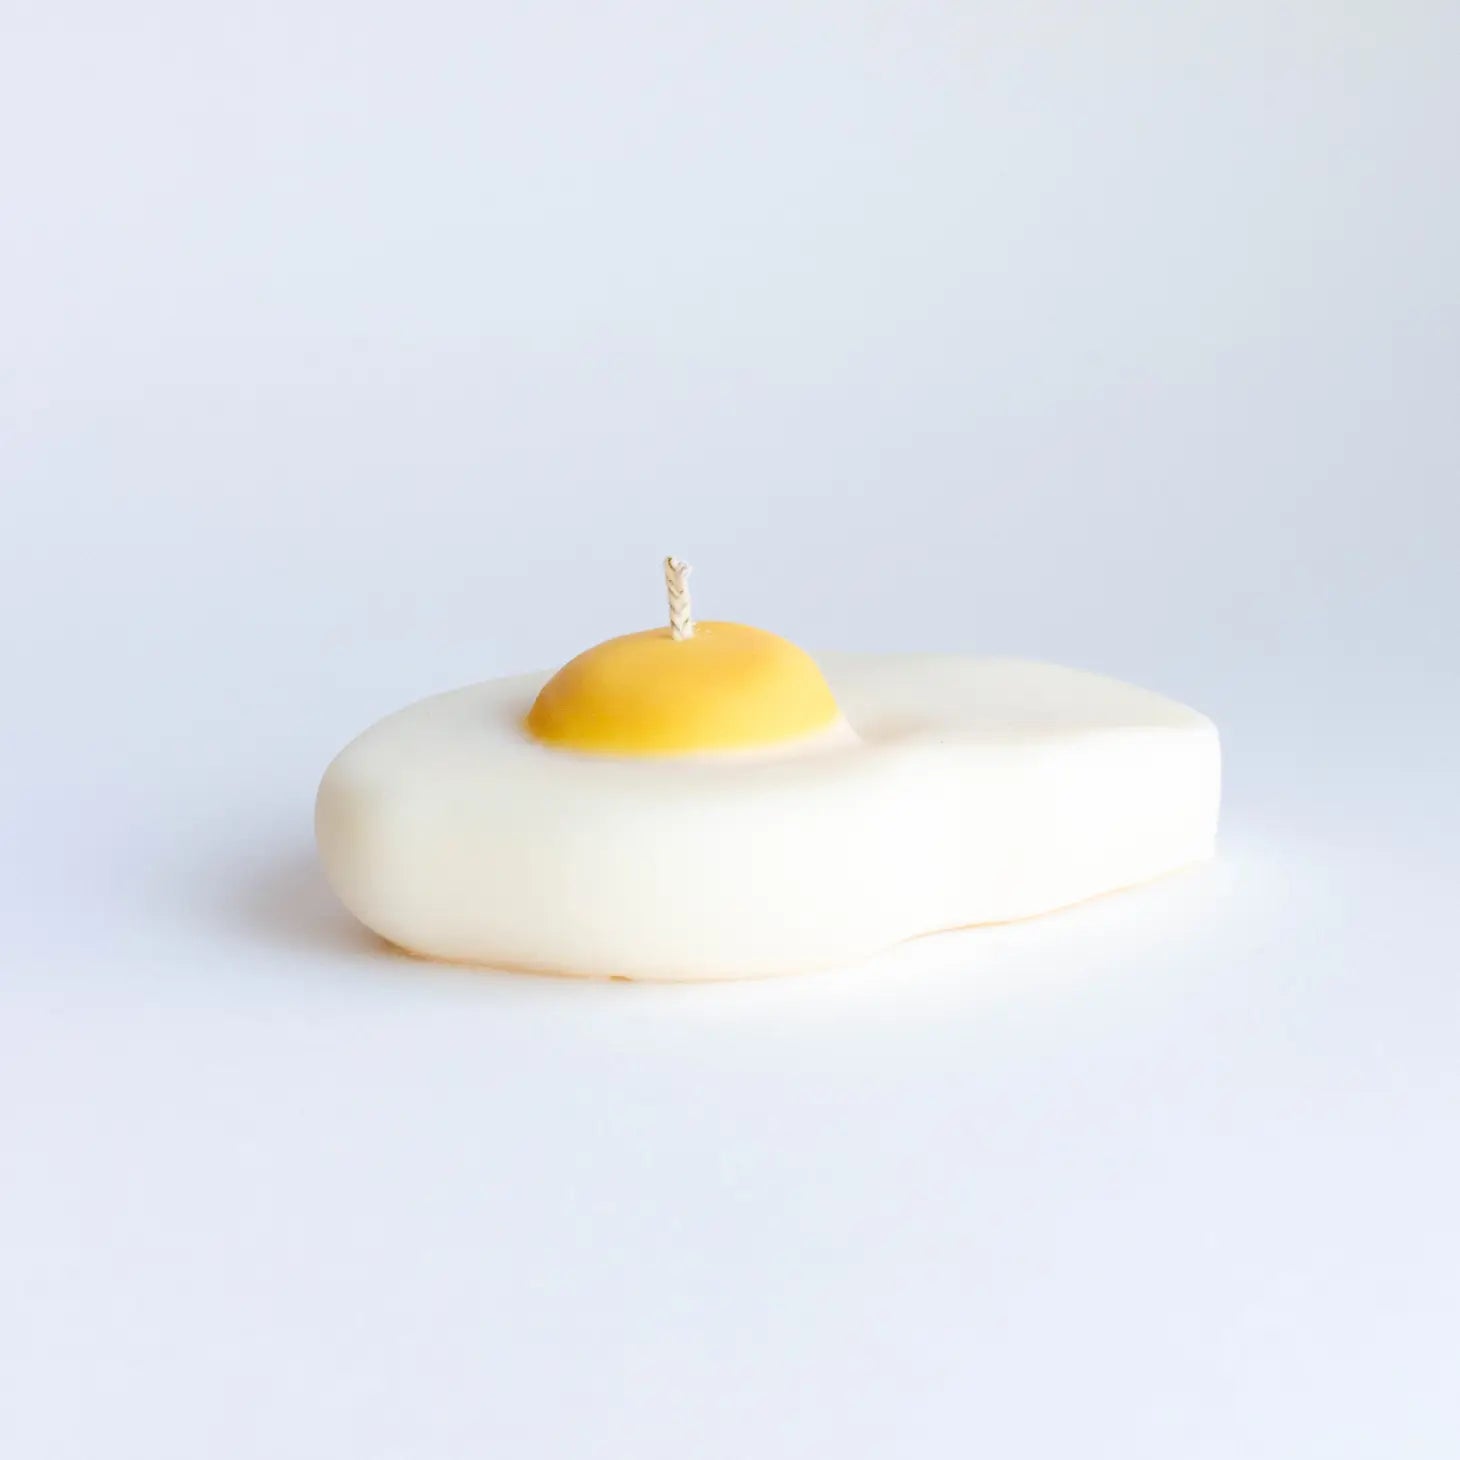 Egg on the plate candle